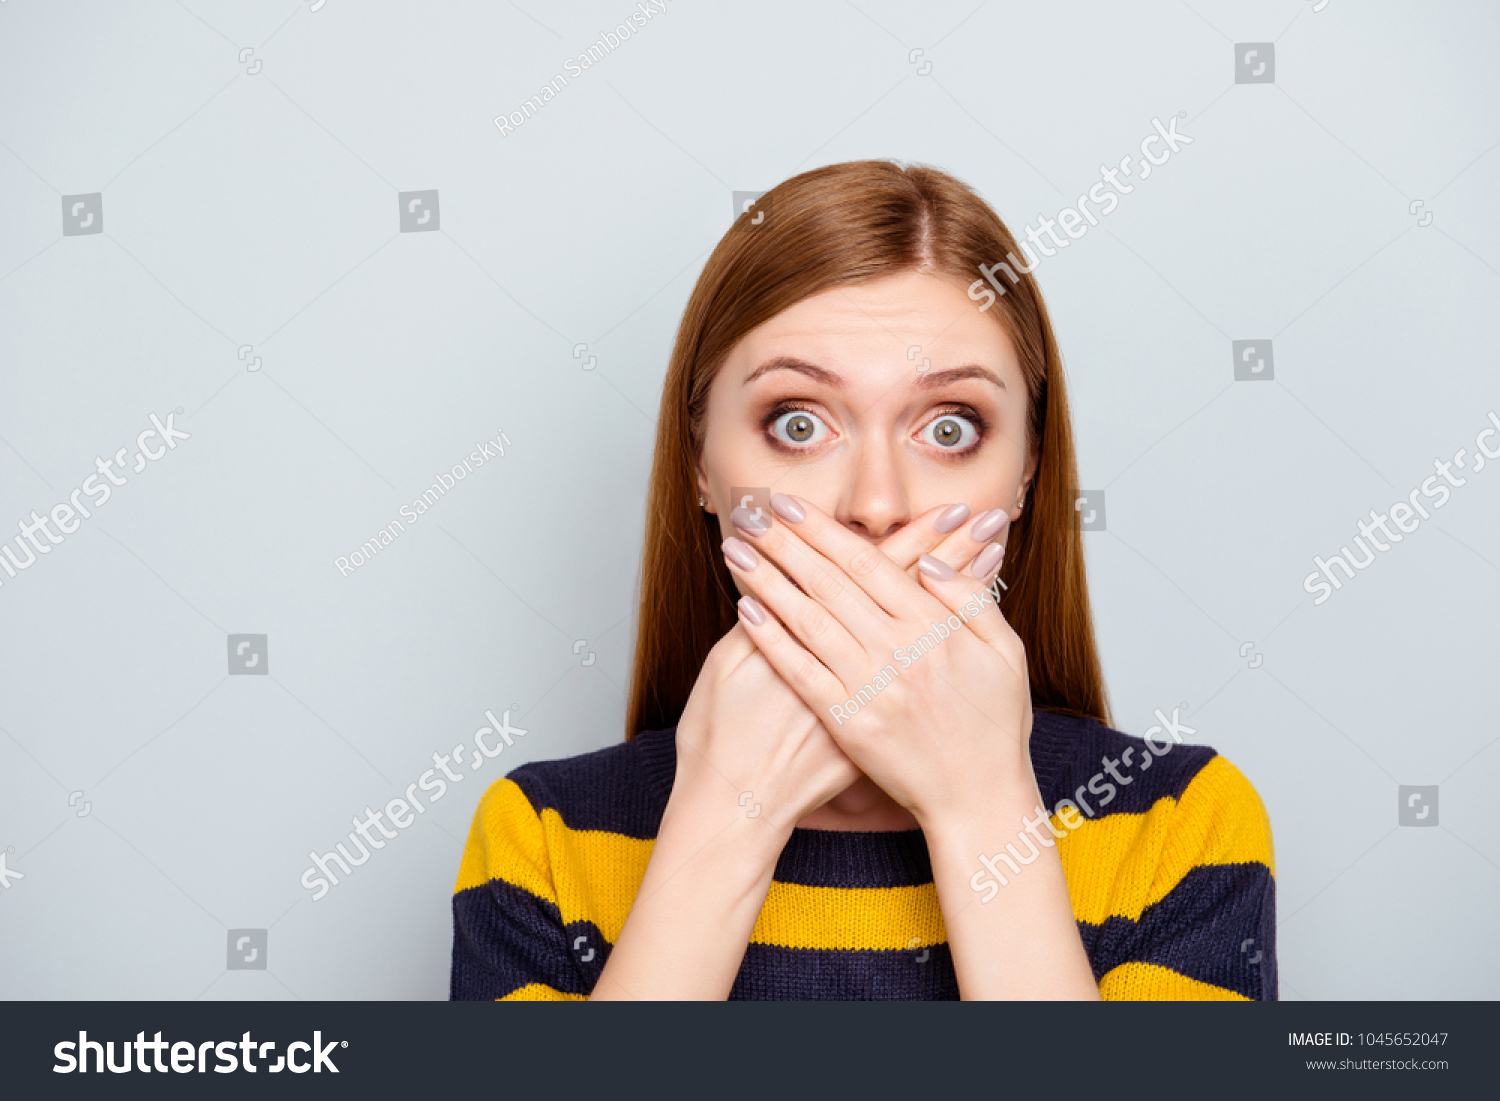 Hush scared business people coughing big pop-eyed fashion concept. Close up portrait of pretty cute terrified frightened mute silent manager model with palms over mouth isolated gray background #1045652047